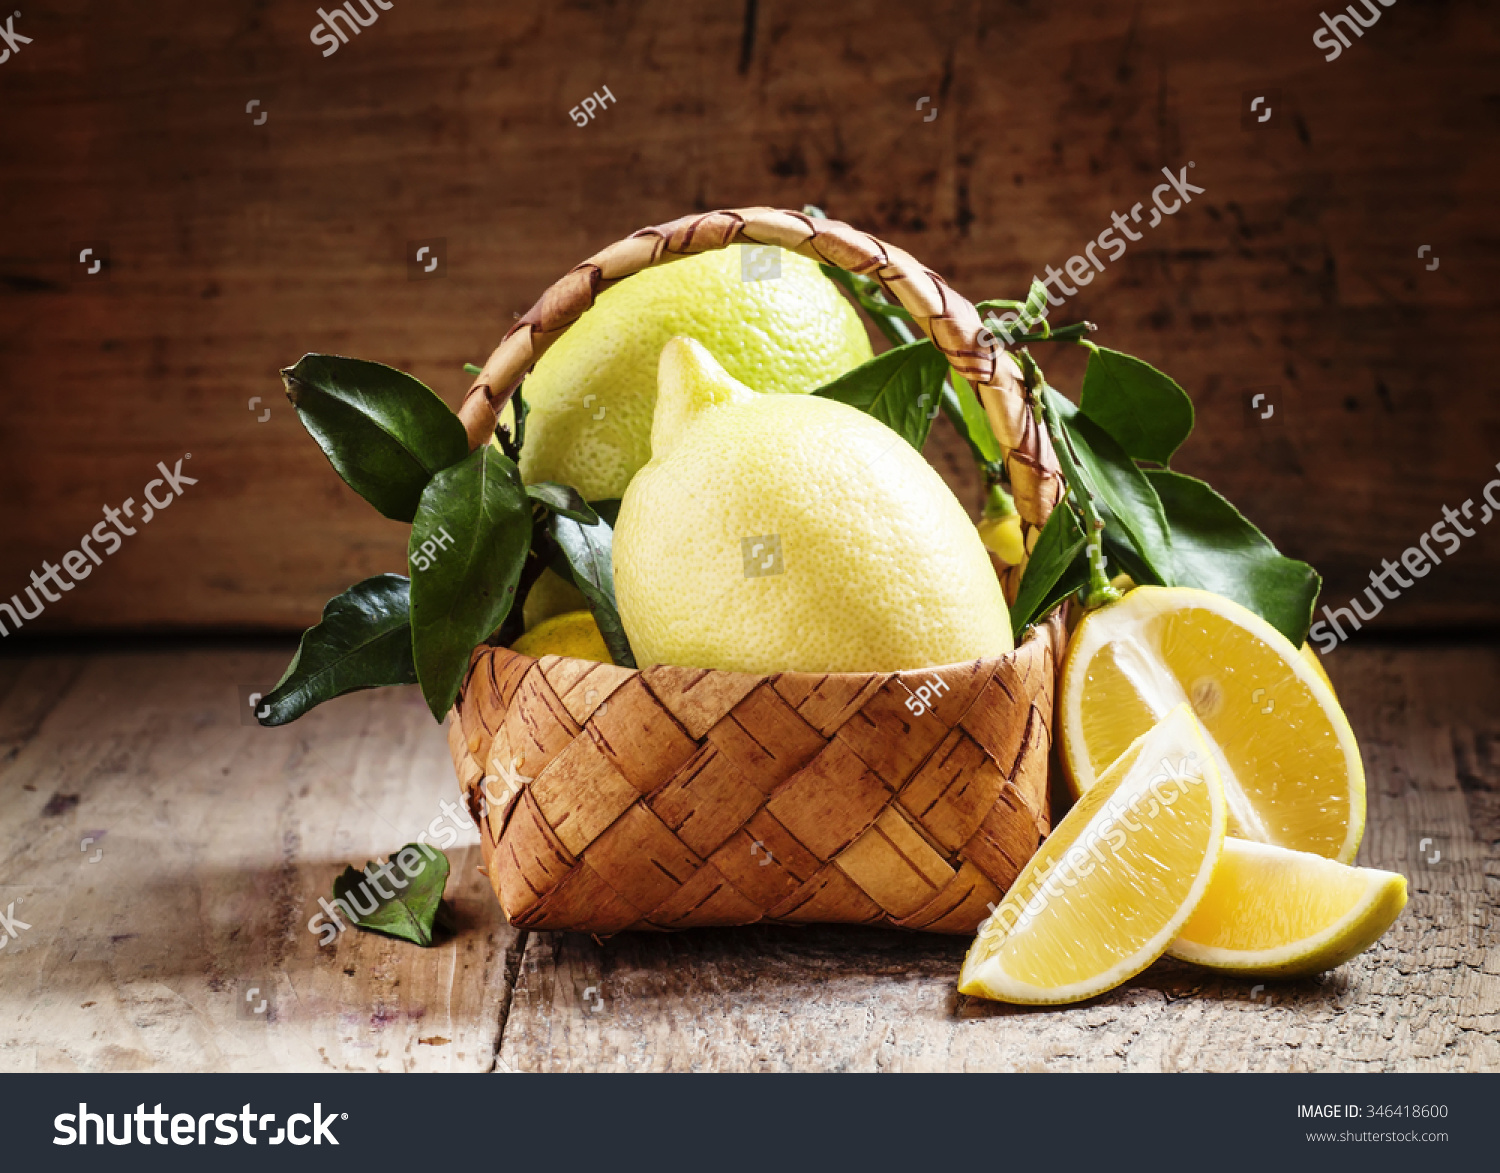 Slices of lemon and cut lemons with leaves in a wicker basket on an old wooden table in rustic style, selective focus #346418600